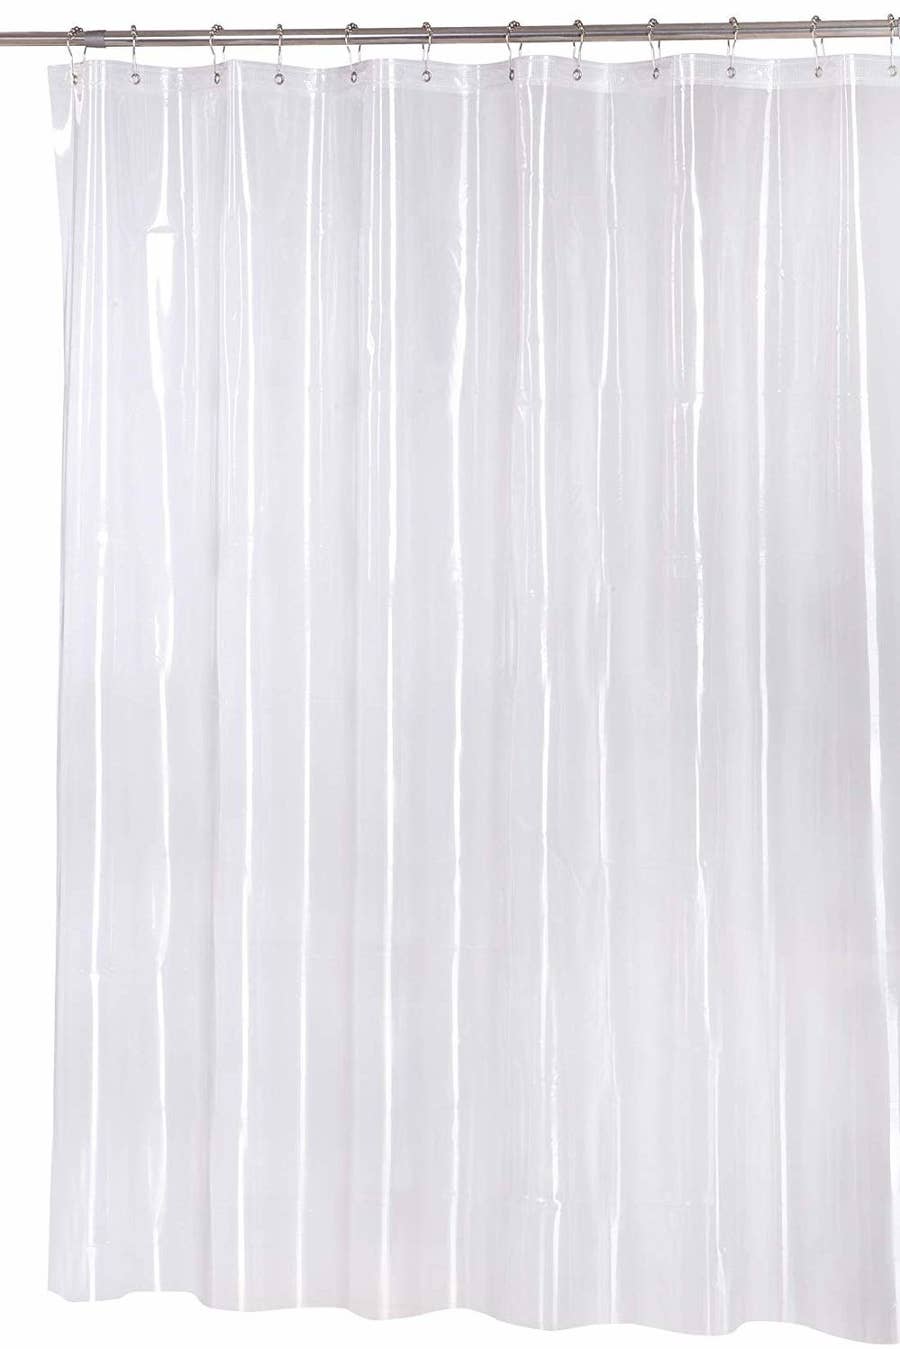 Best Shower Curtains You Can Get On, Best Antibacterial Shower Curtain Liner